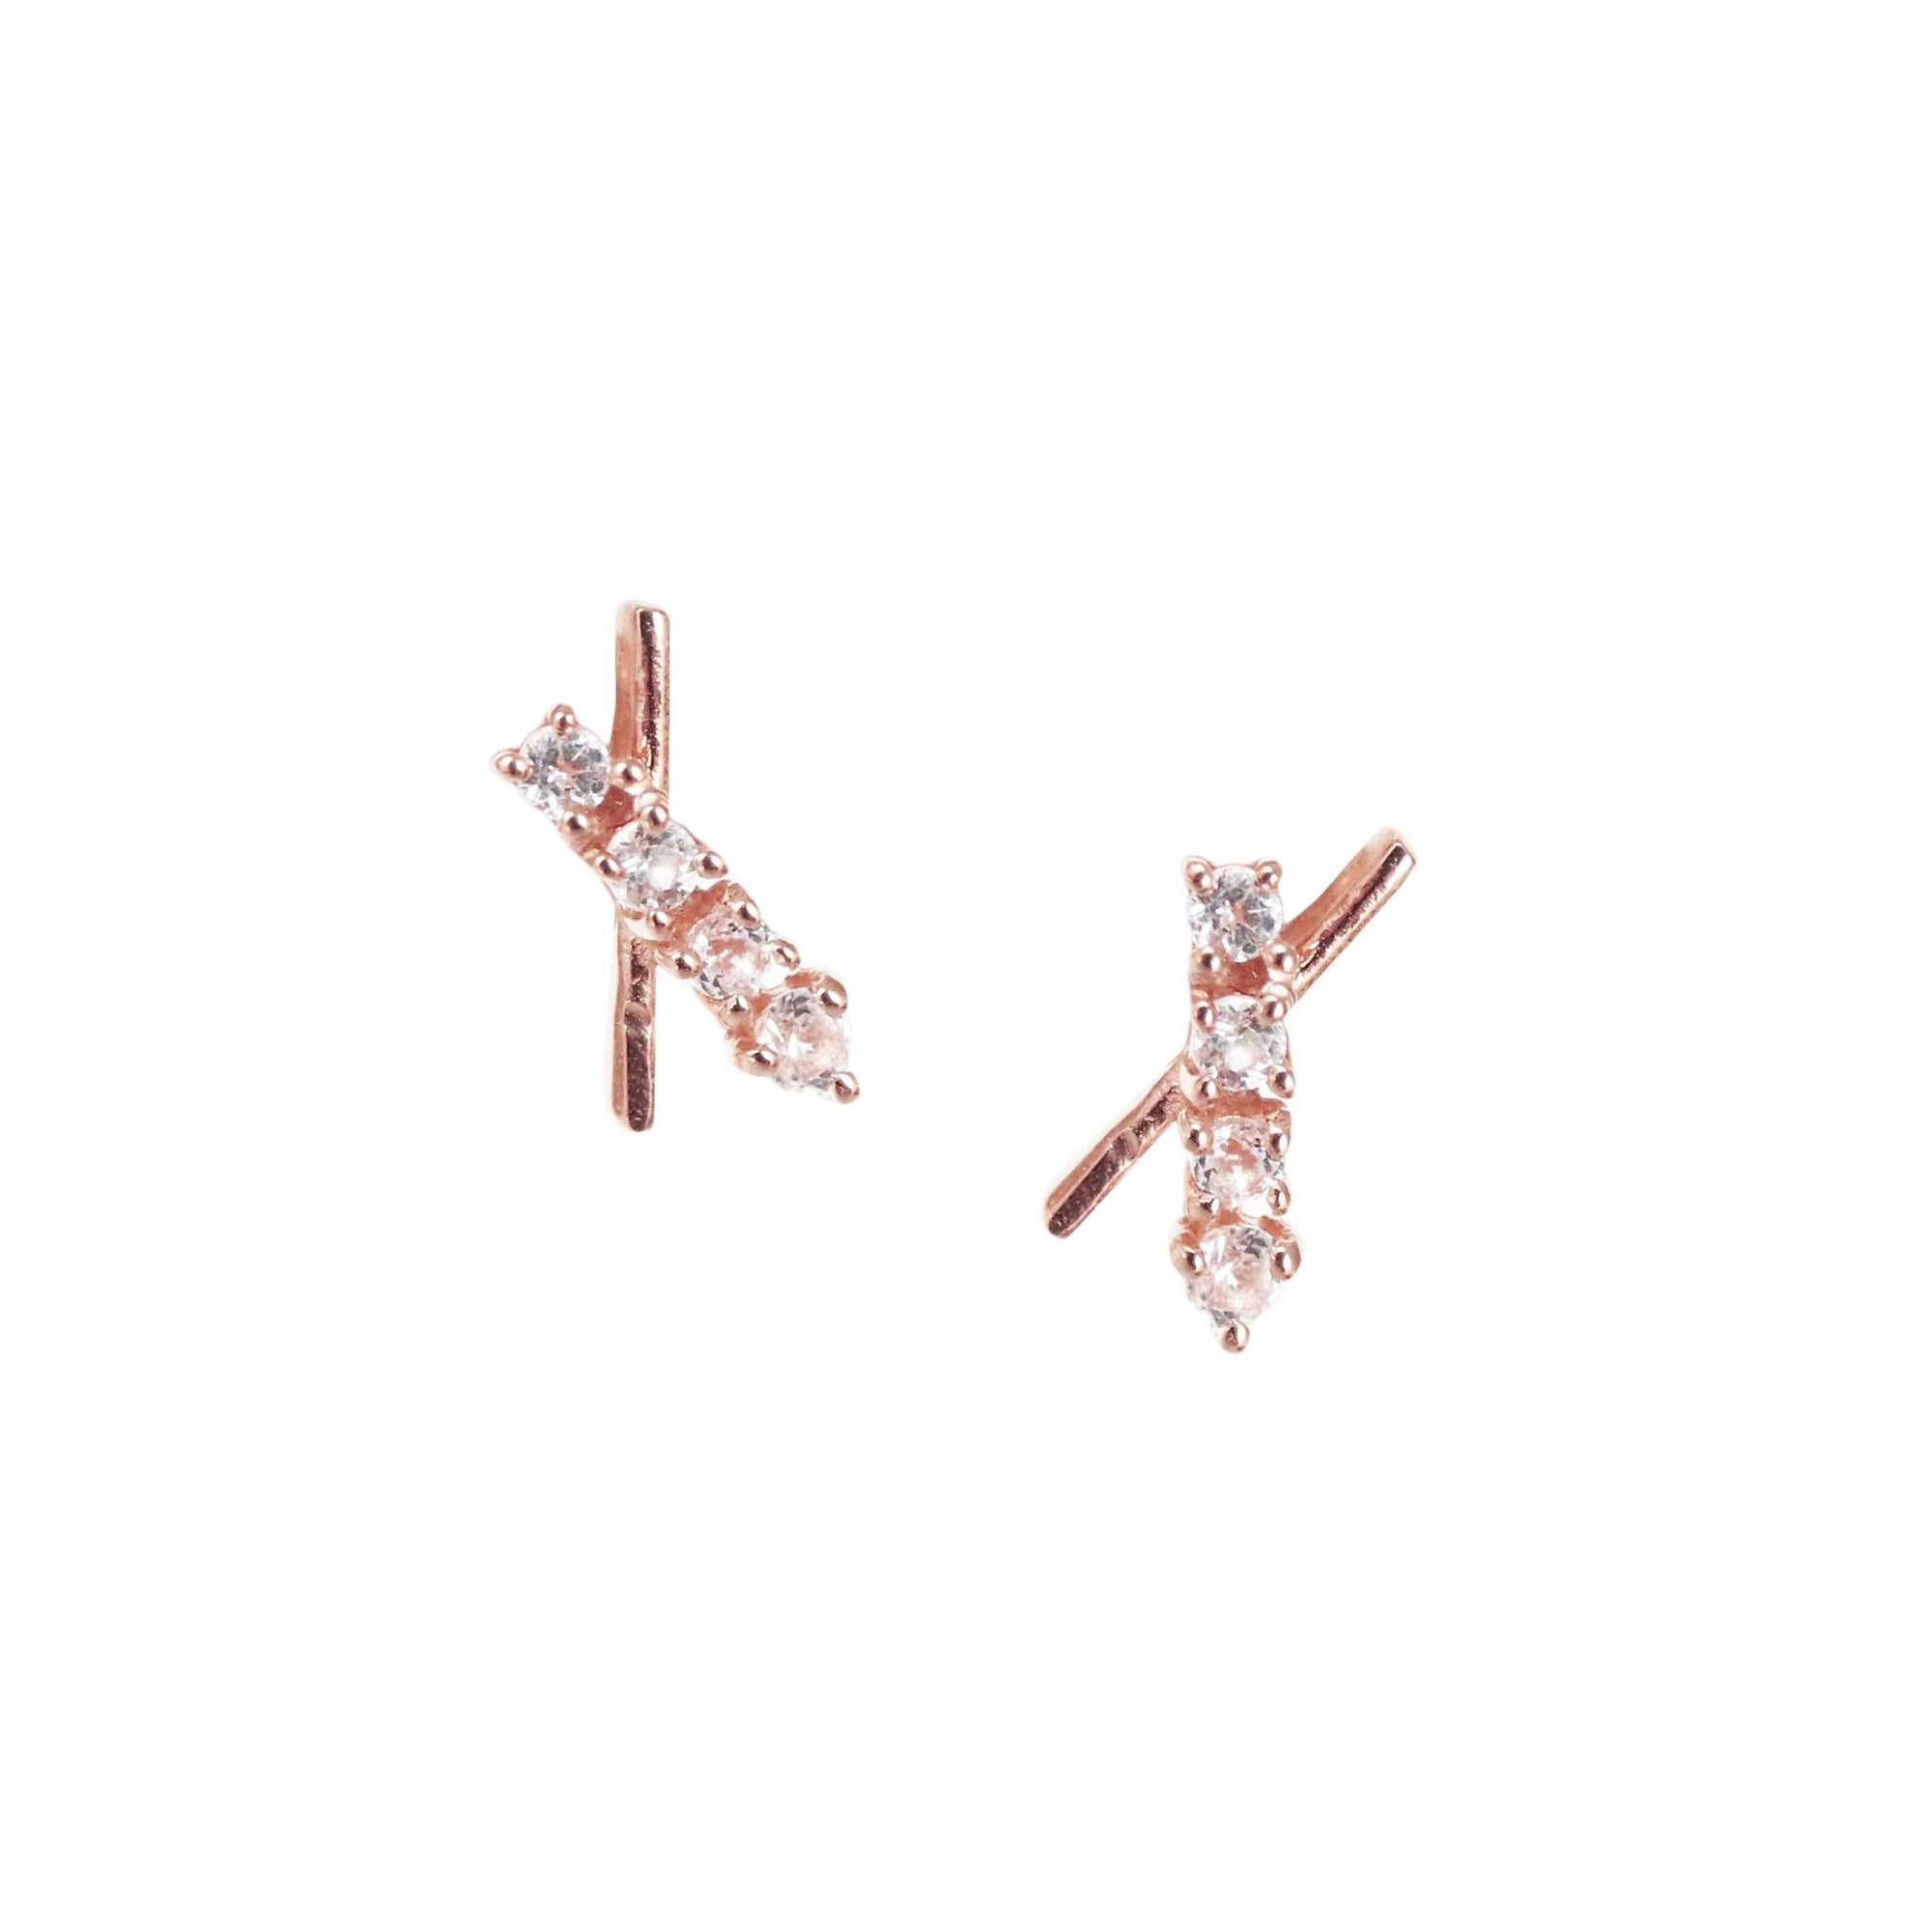 TINY DREAM STARDUST STUDS - CUBIC ZIRCONIA & ROSE GOLD - SO PRETTY CARA COTTER